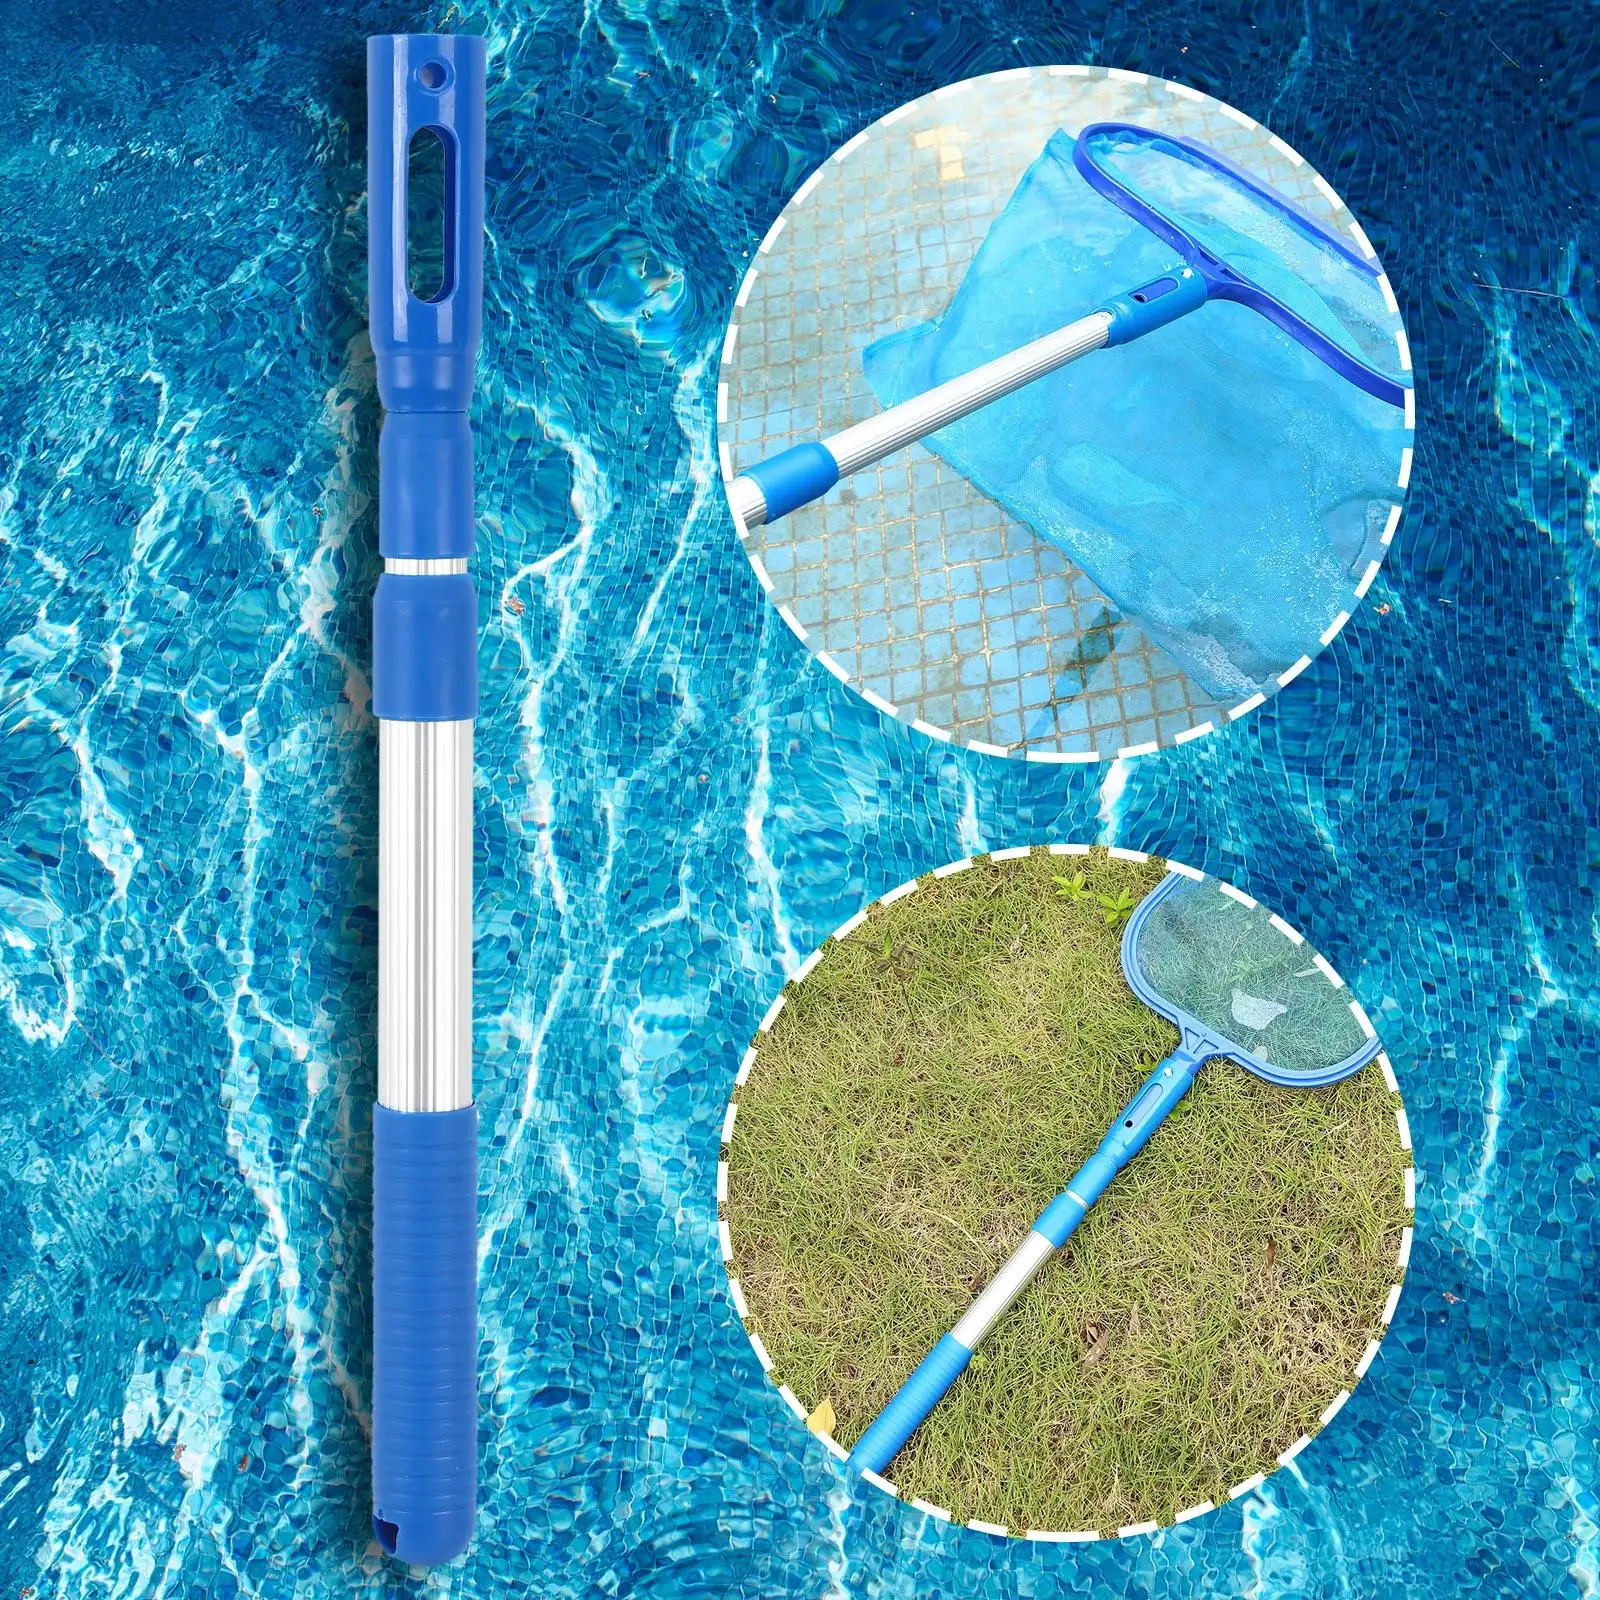 Aluminum Alloy Pool Handle 3 Stage Rod for Rakes Brushes Vacuum Heads